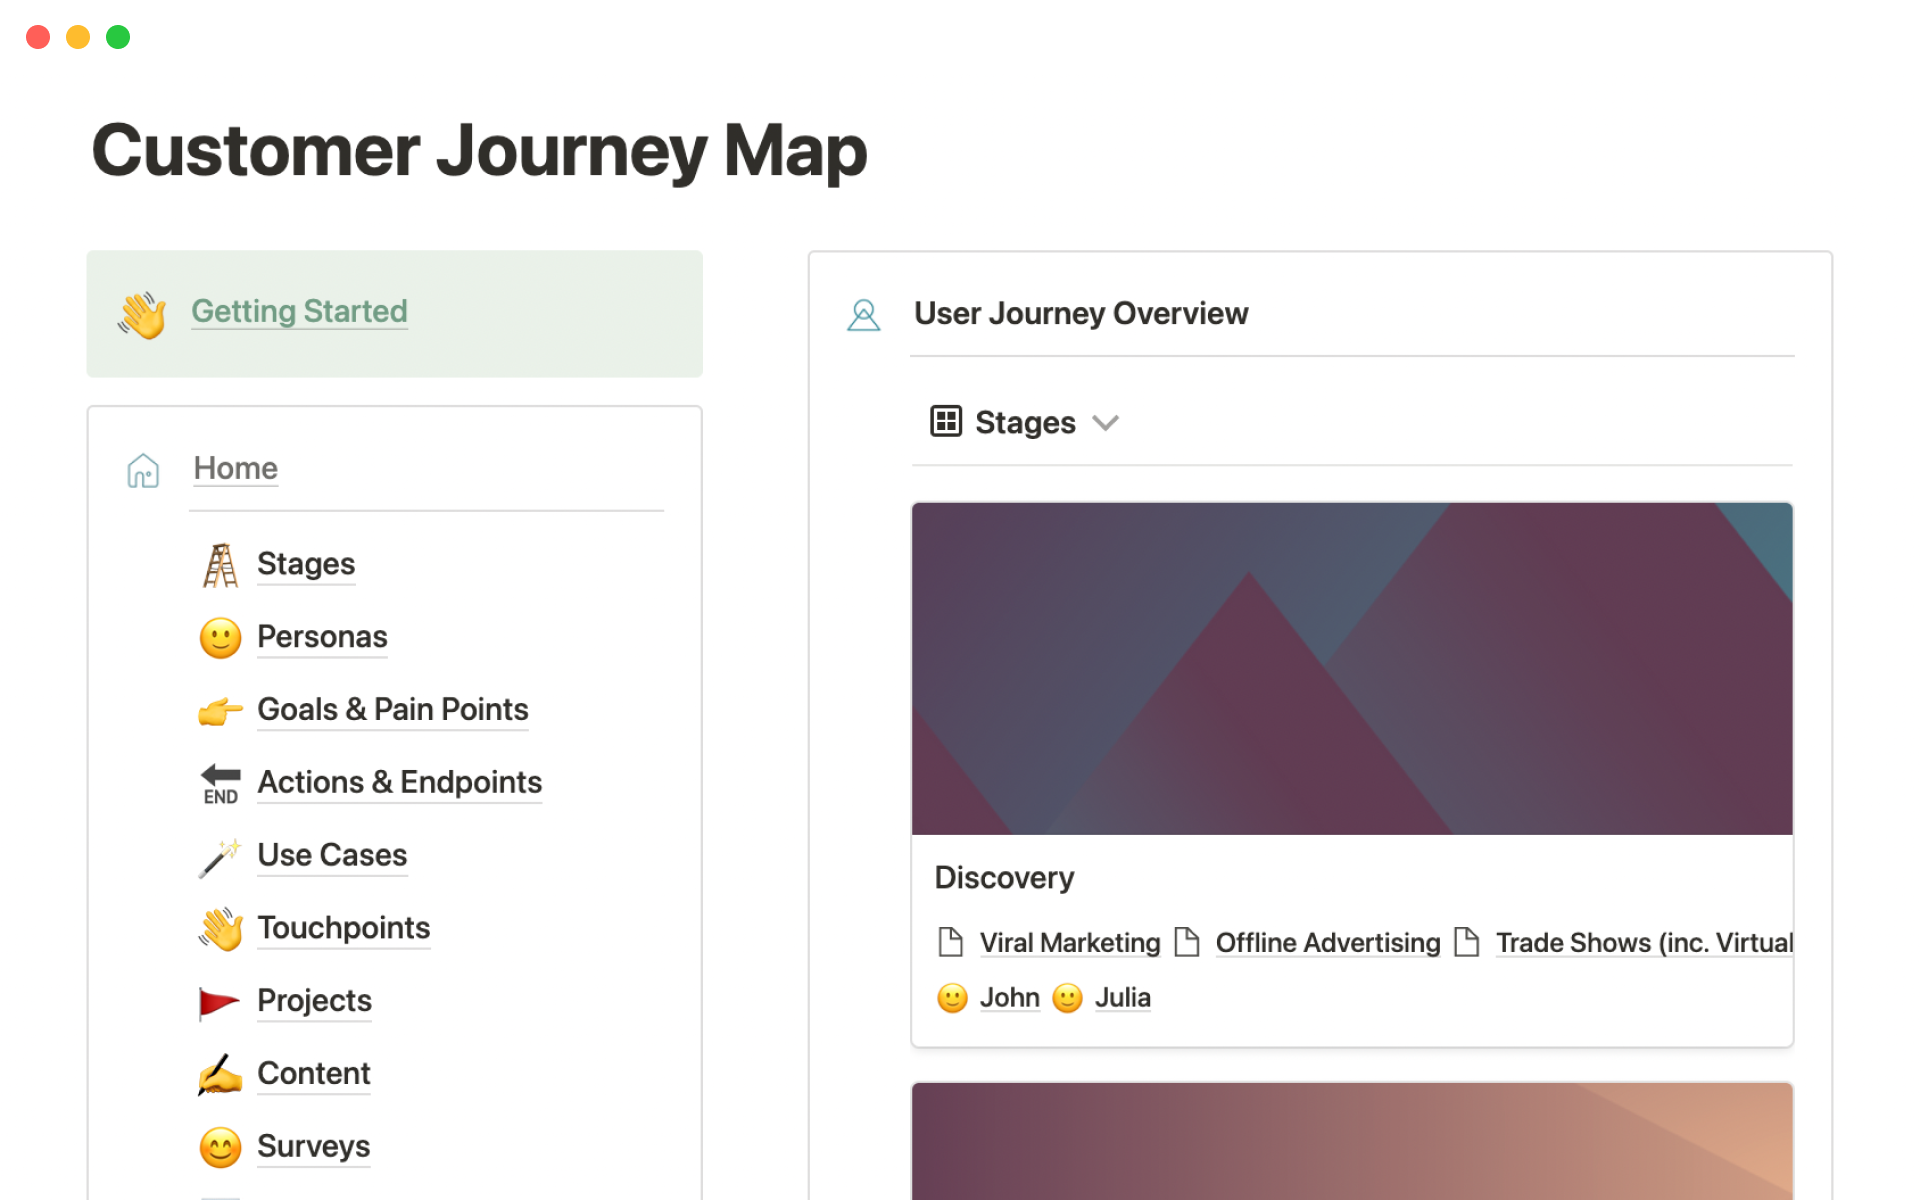 Map rich, detailed customer journeys that accurately capture key the steps, sentiments and goals of your target personas.